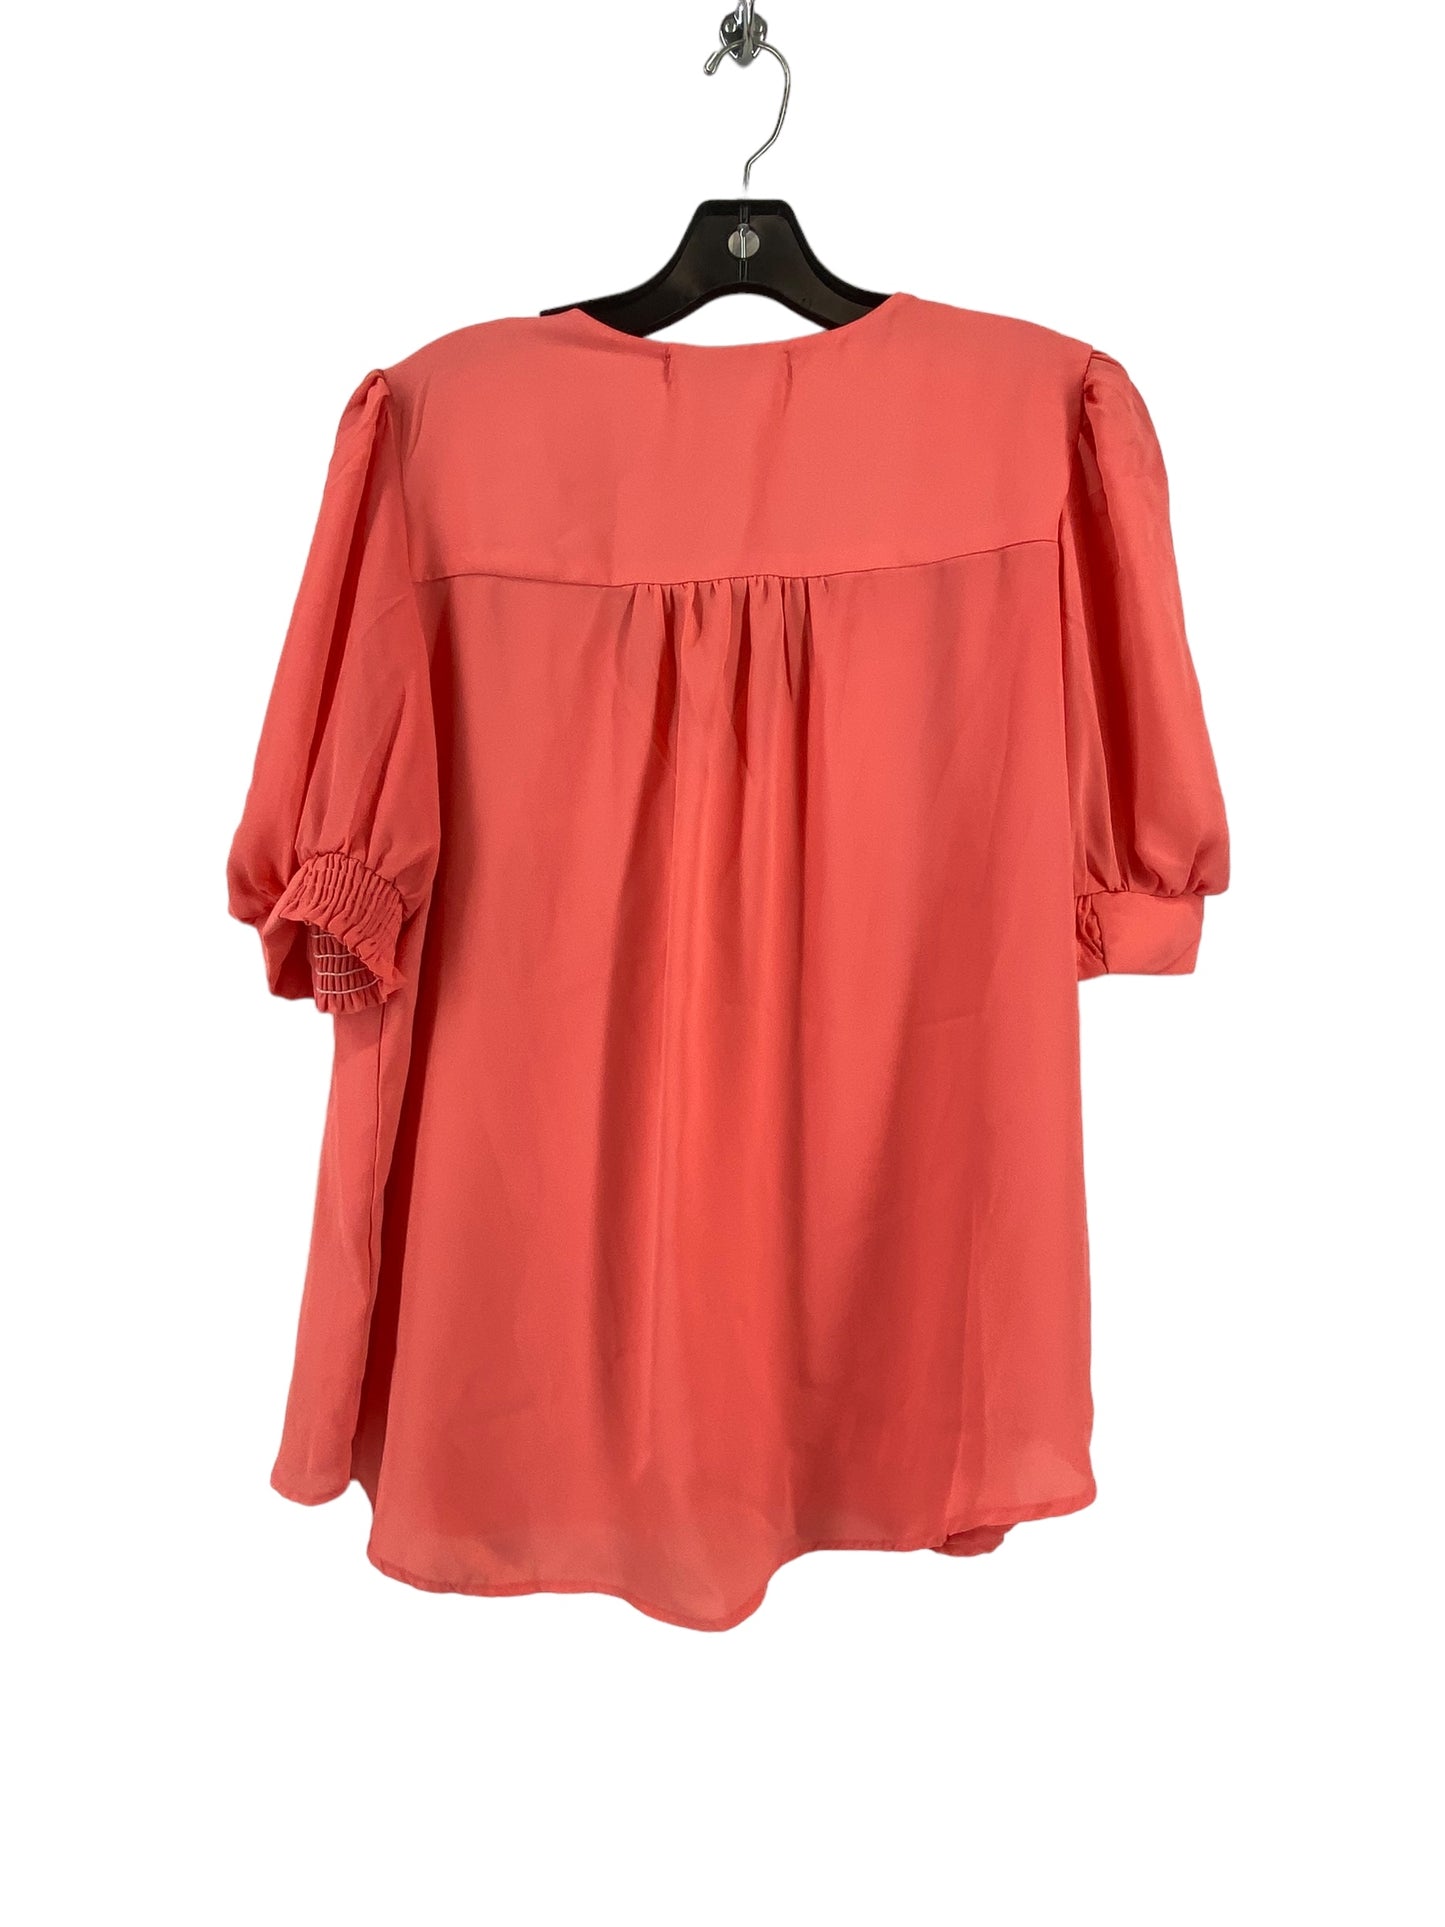 Coral Top Short Sleeve Clothes Mentor, Size L